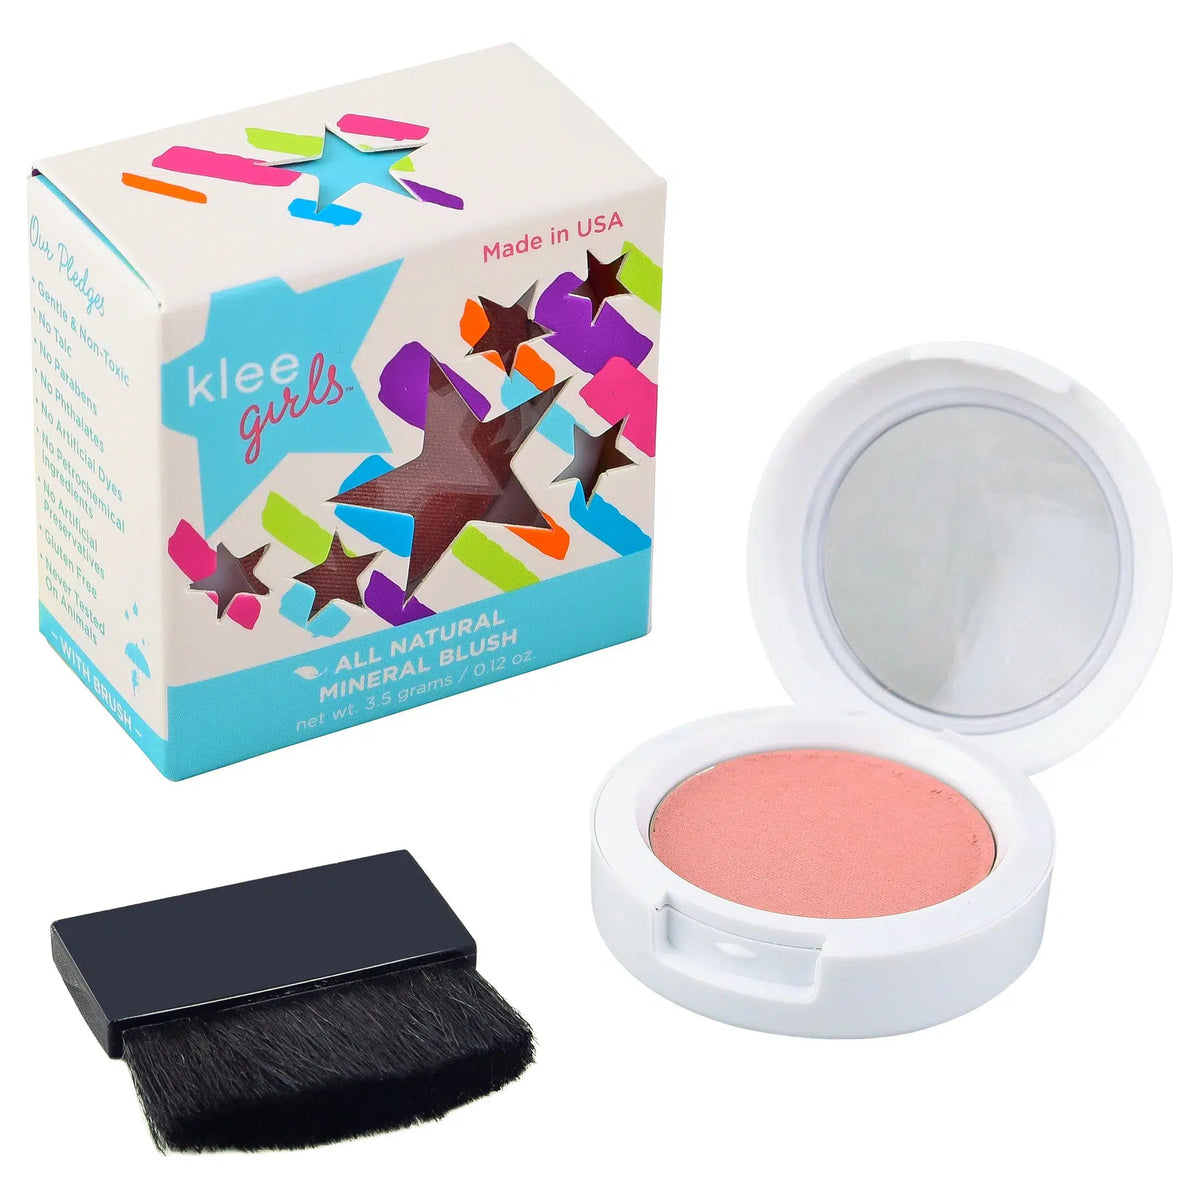 Front view of All Natural Blush-Carmel Shine in its package with compact and brush outside of package.